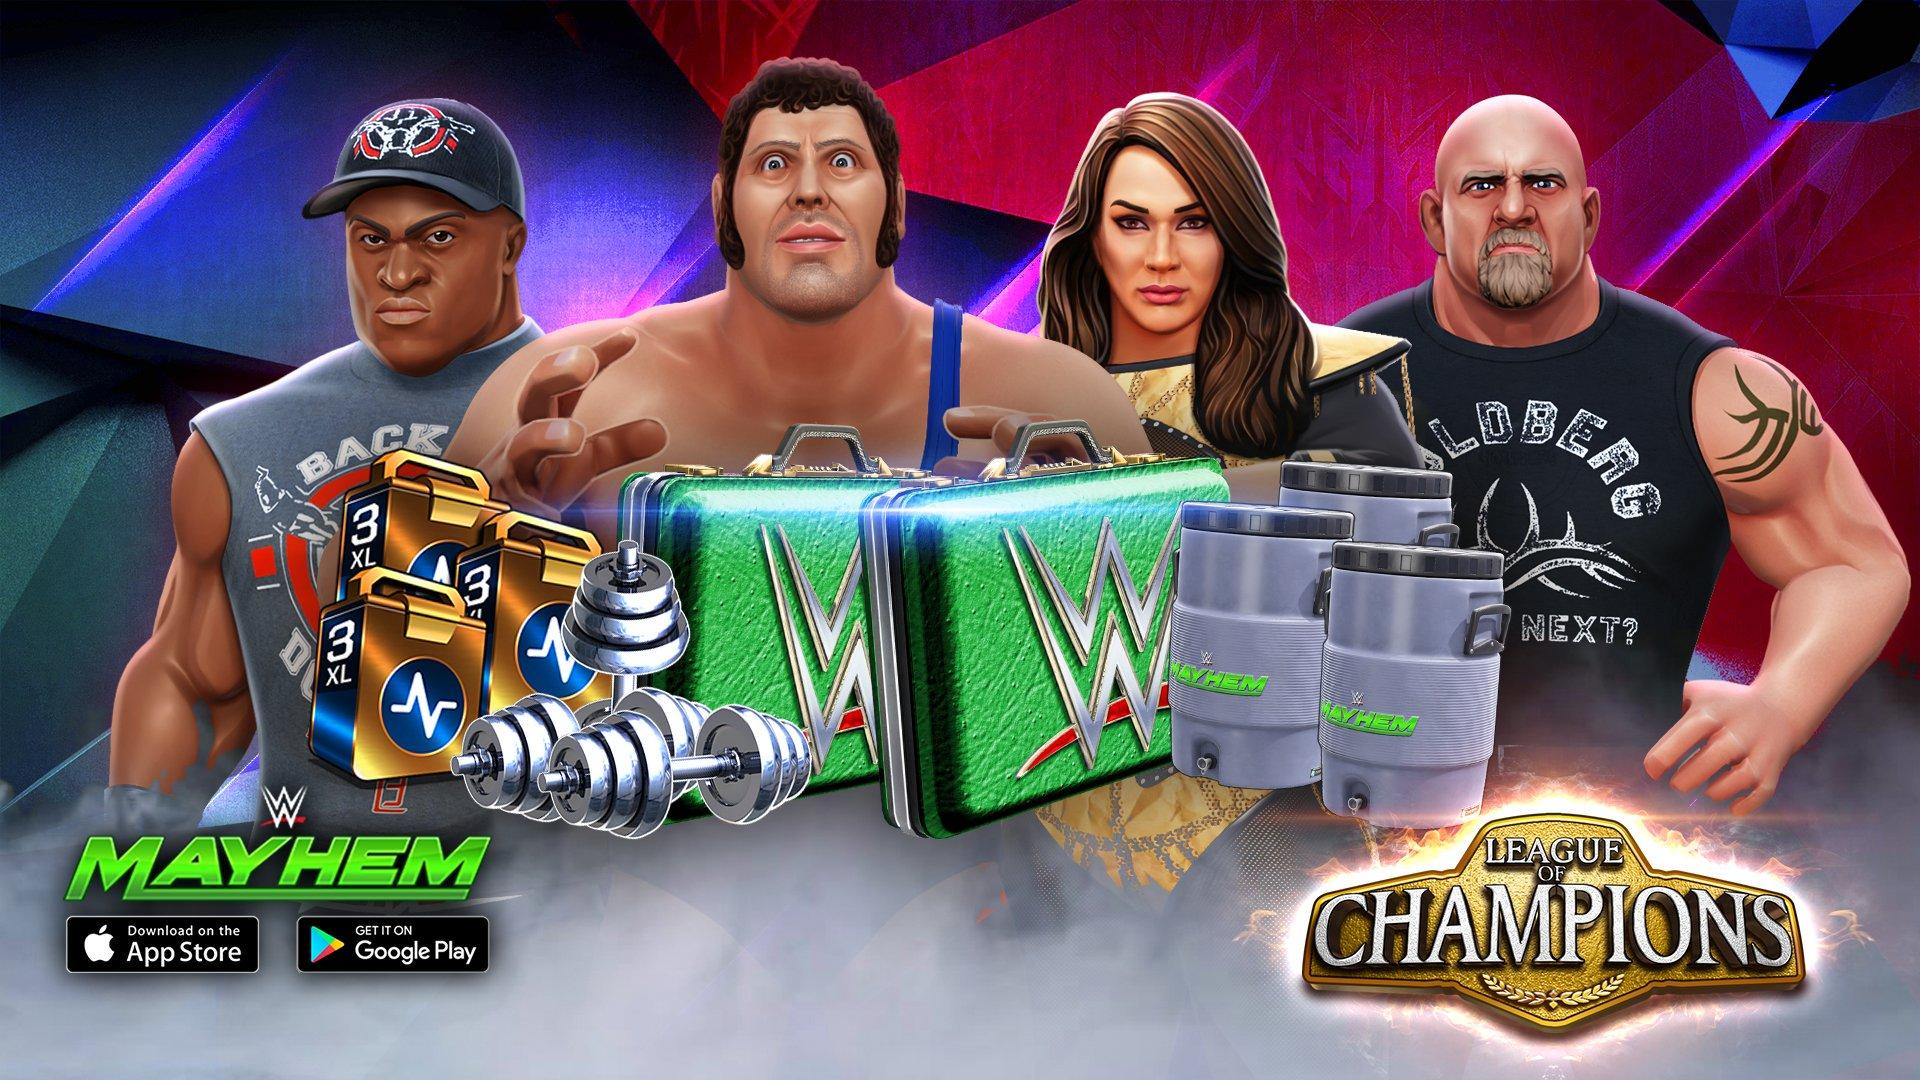 WWE Mayhem one day left to complete